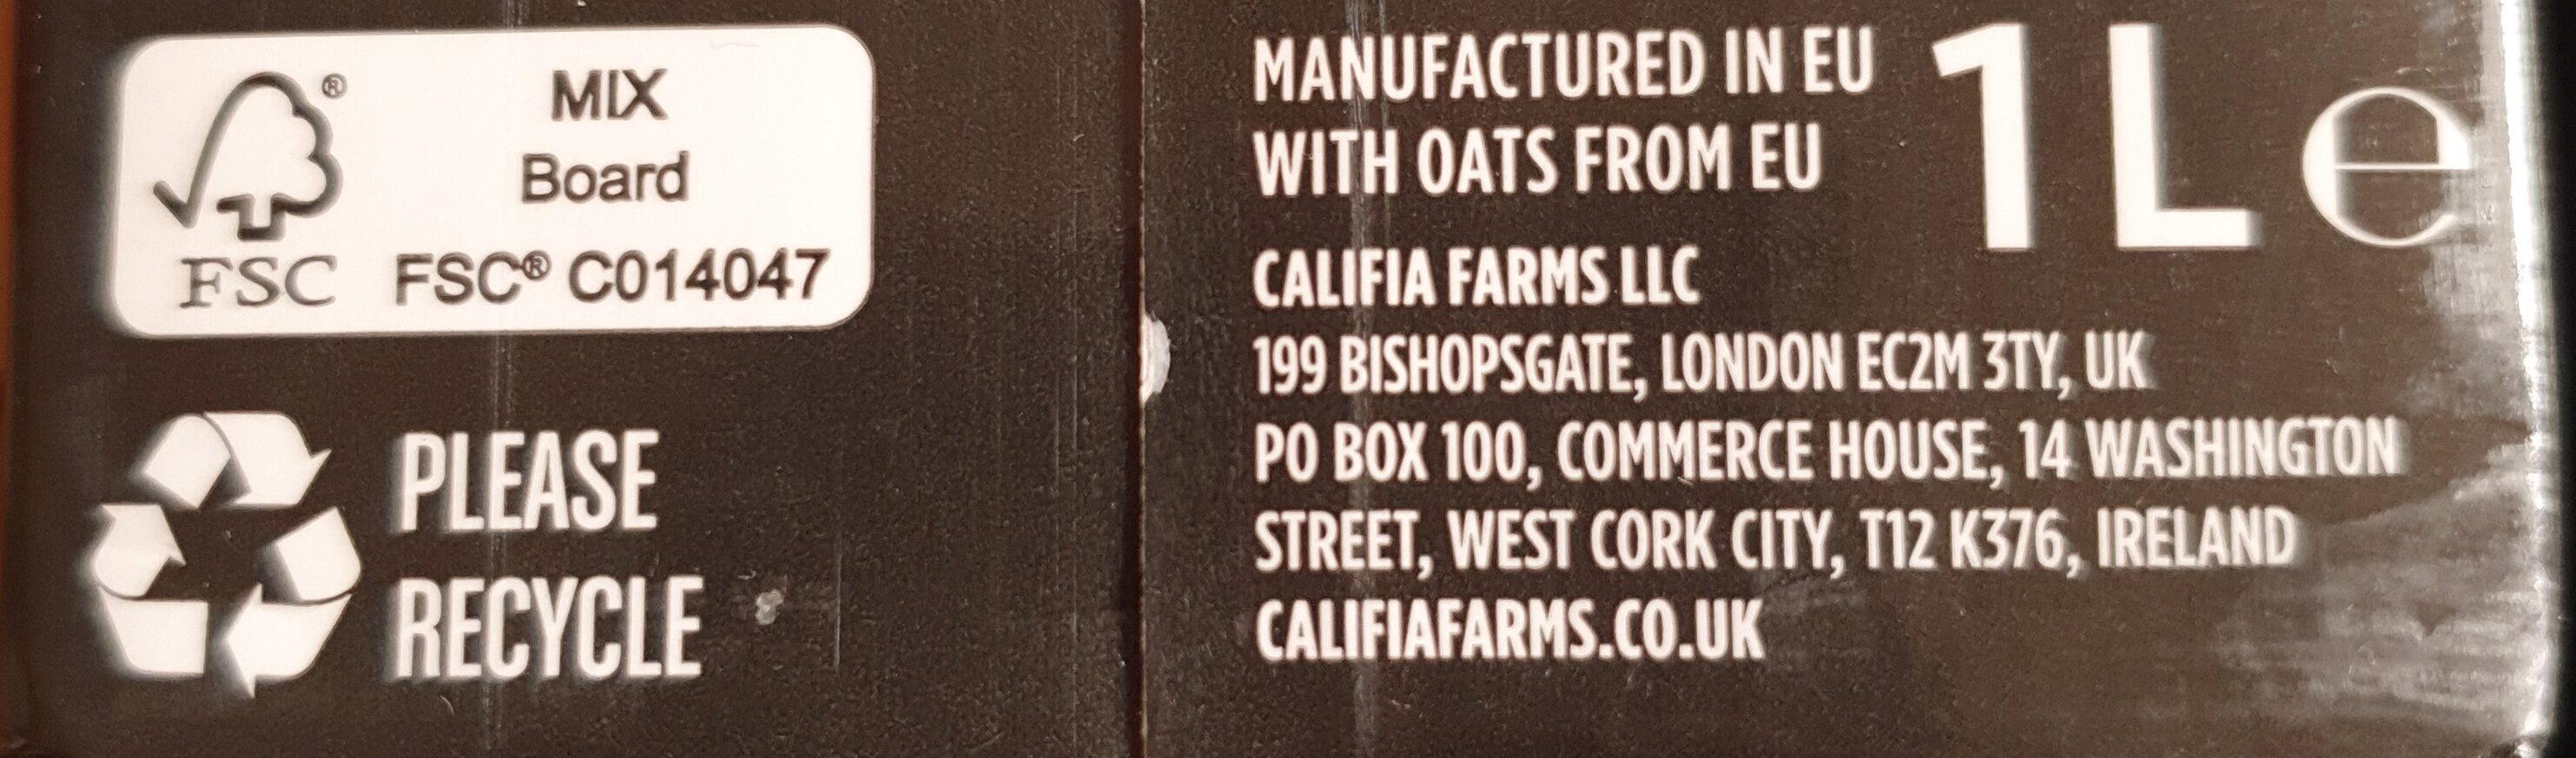 Oat Milk - Recycling instructions and/or packaging information